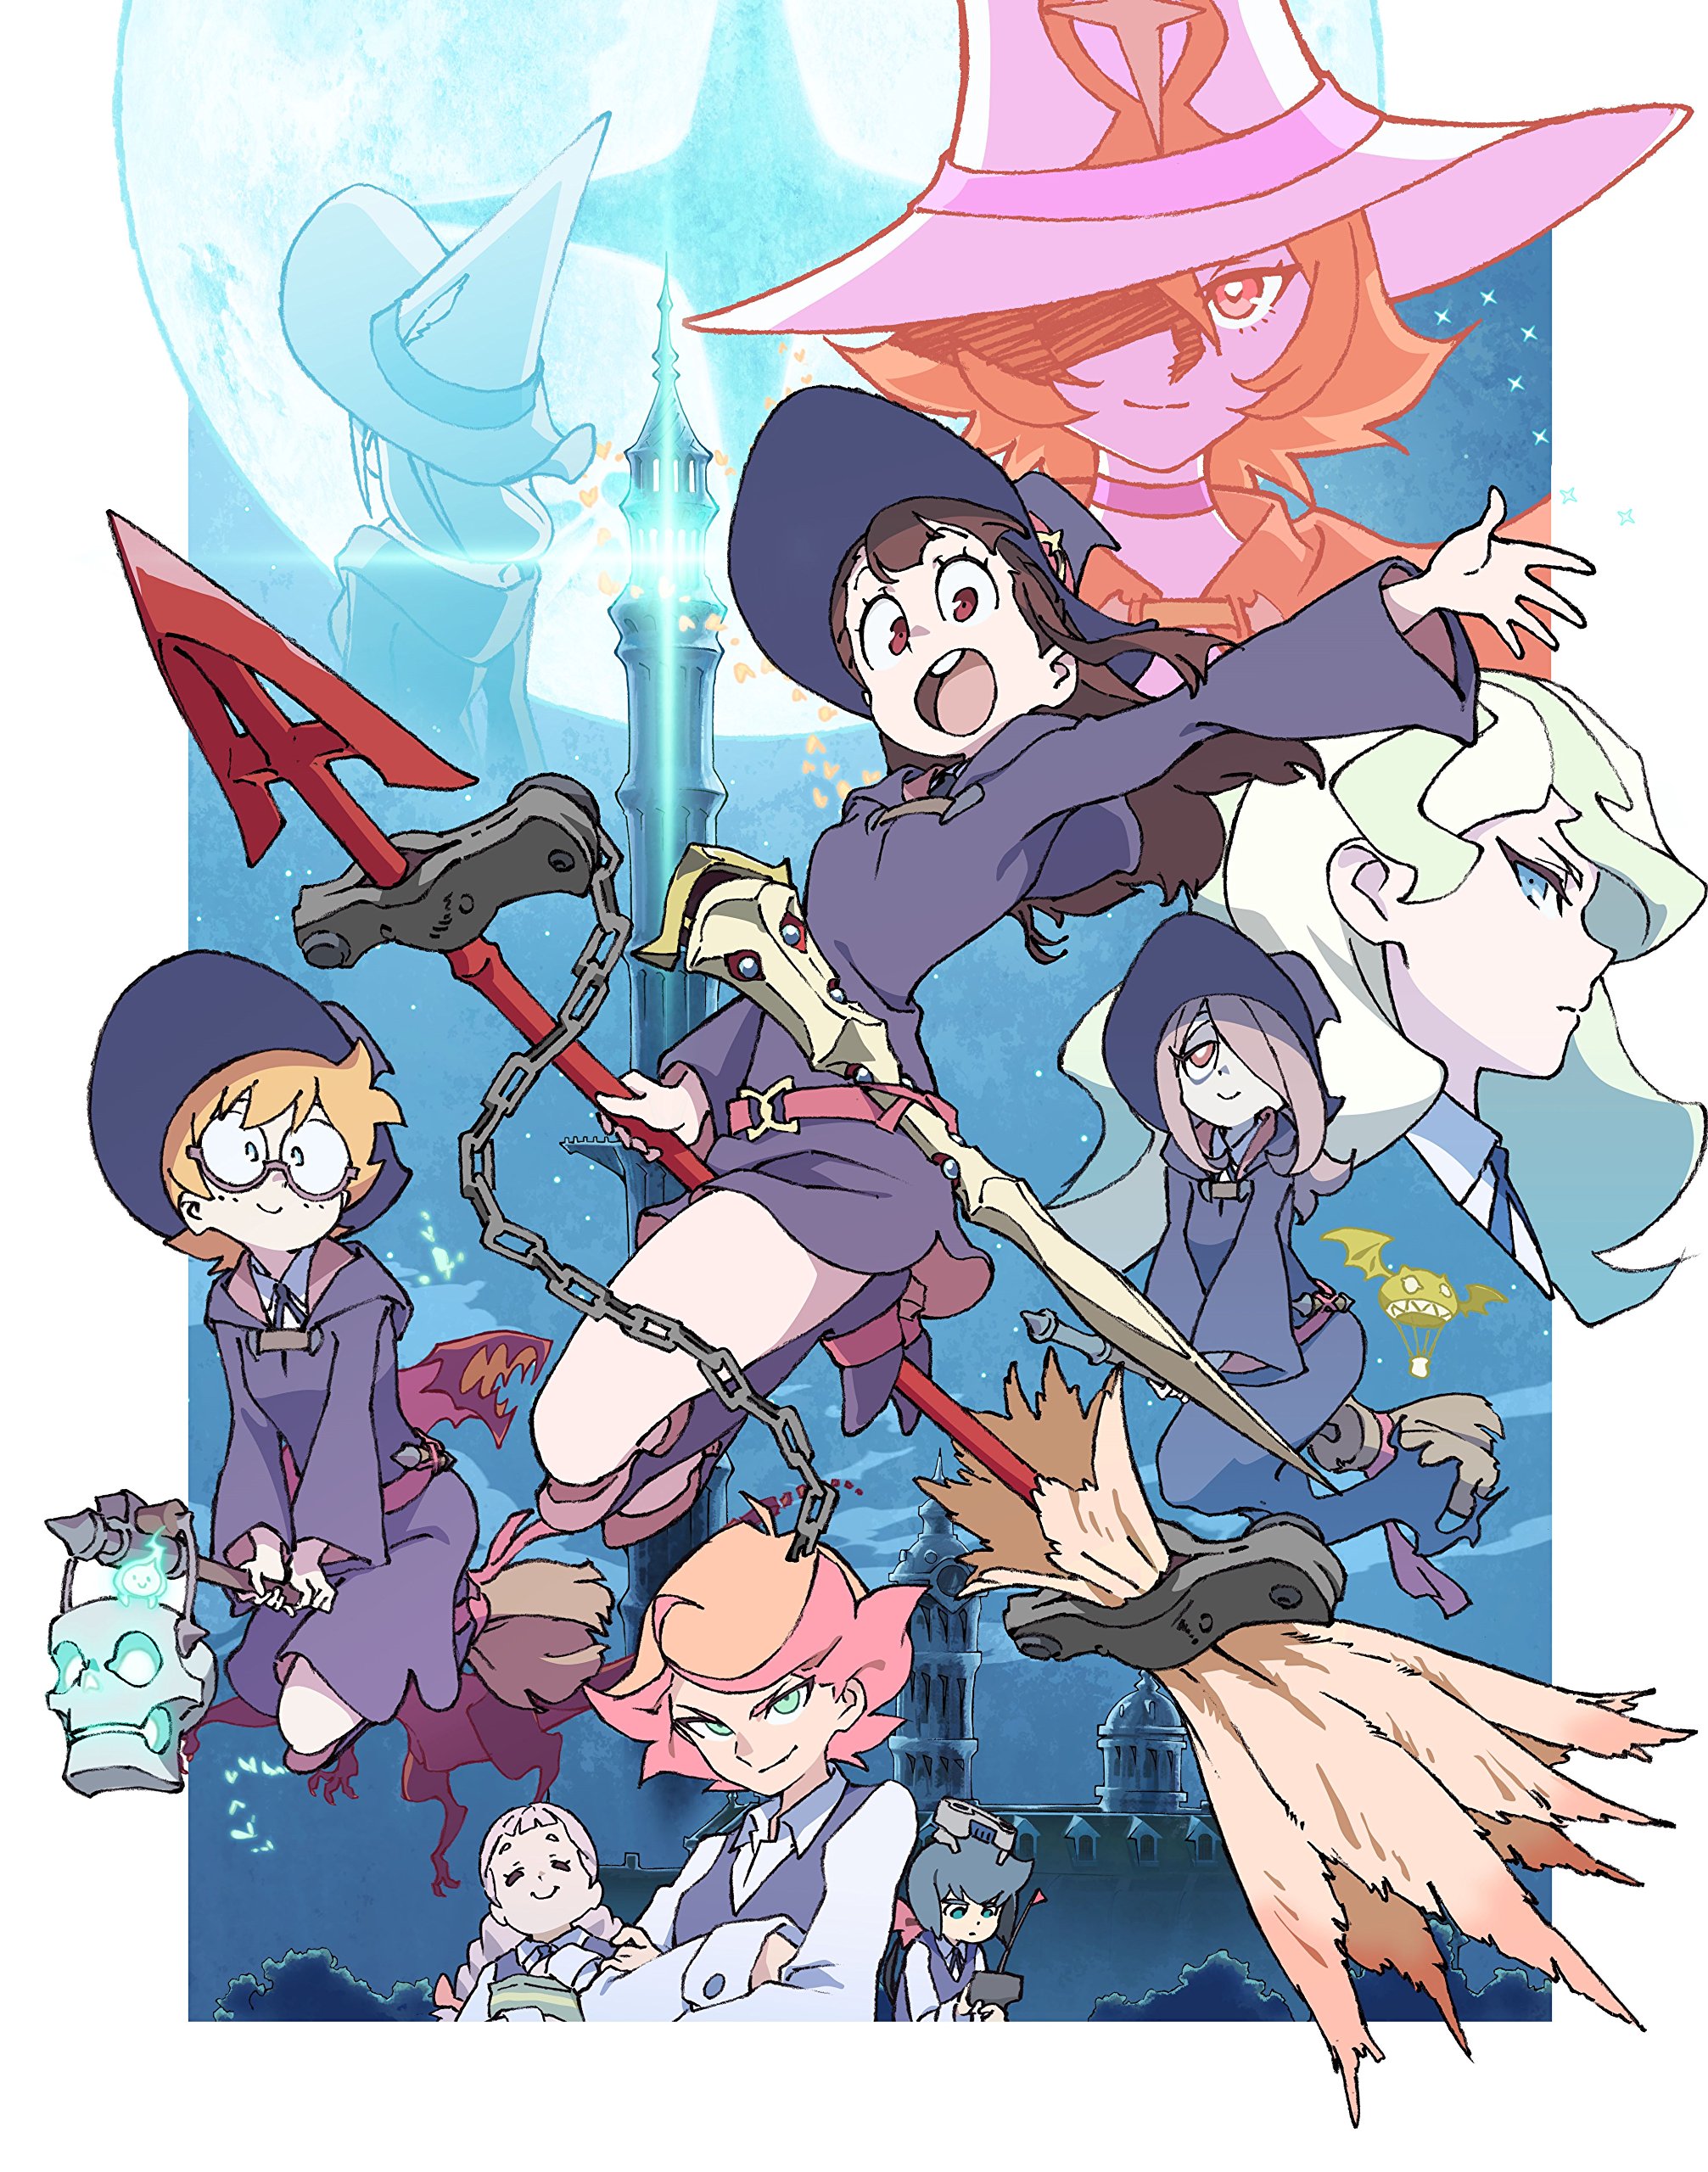 Little Witch Academia: VR Broom Racing game is set to release in October